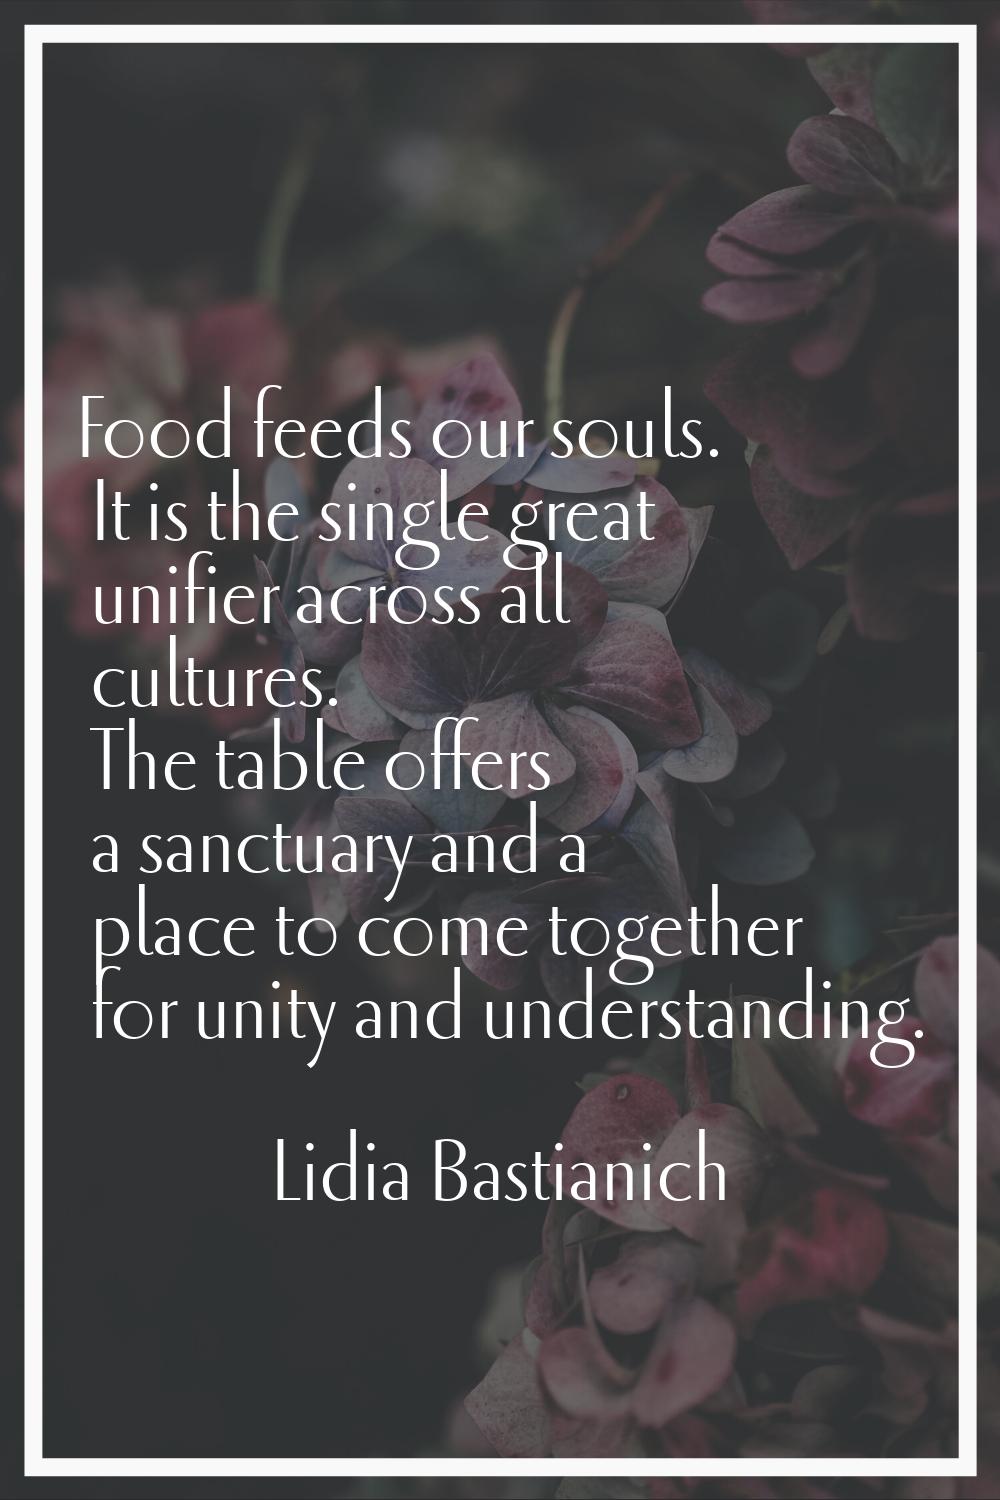 Food feeds our souls. It is the single great unifier across all cultures. The table offers a sanctu